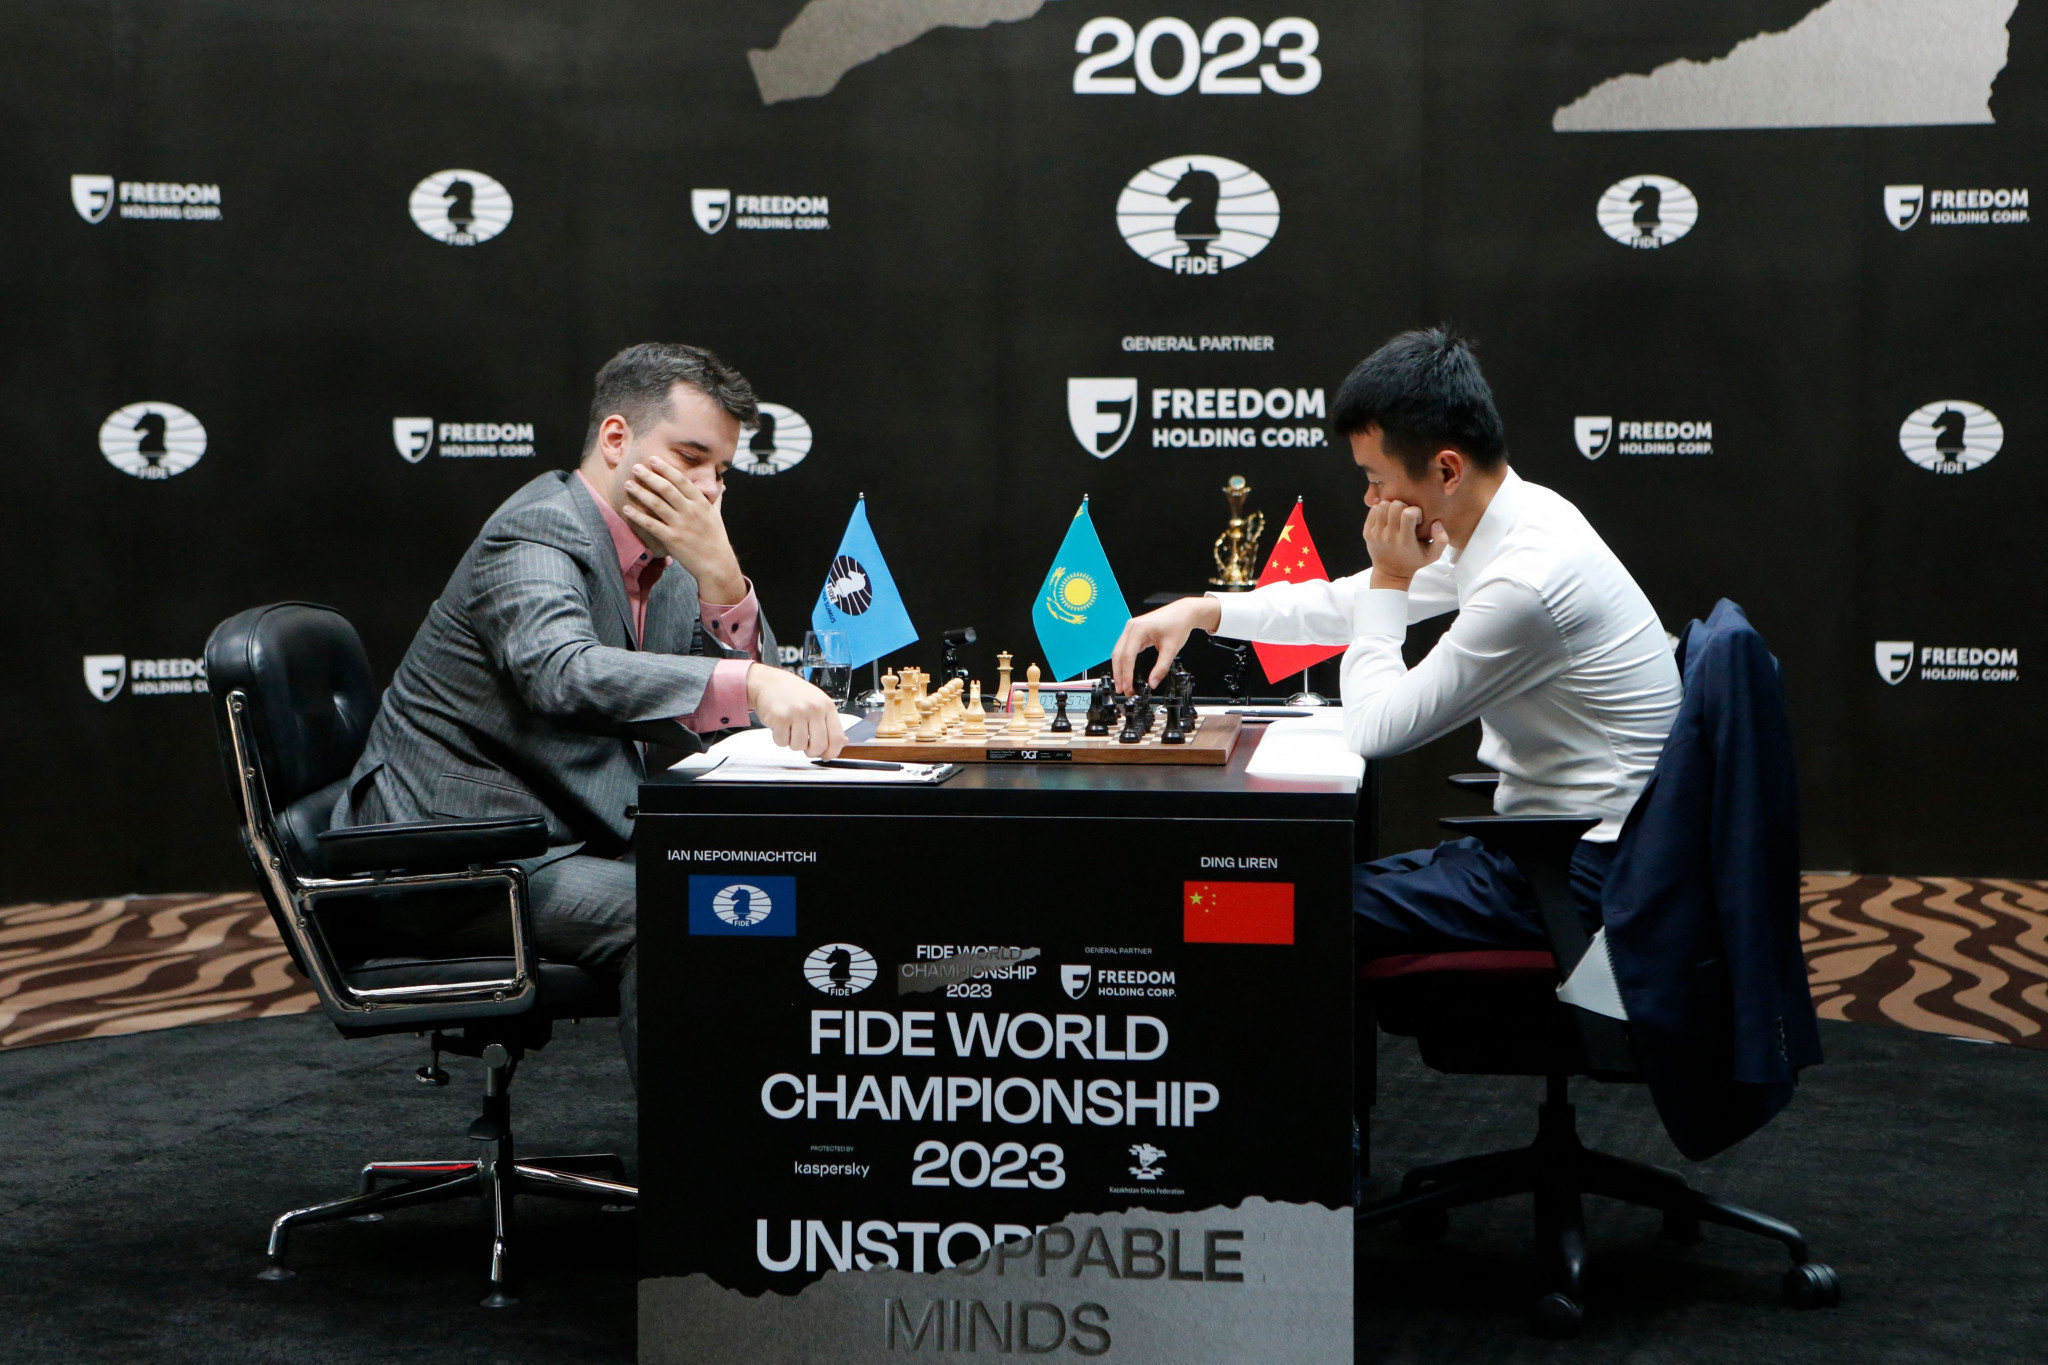 First game of FIDE World Championship Match ends in draw between Ding and Nepomniachtchi